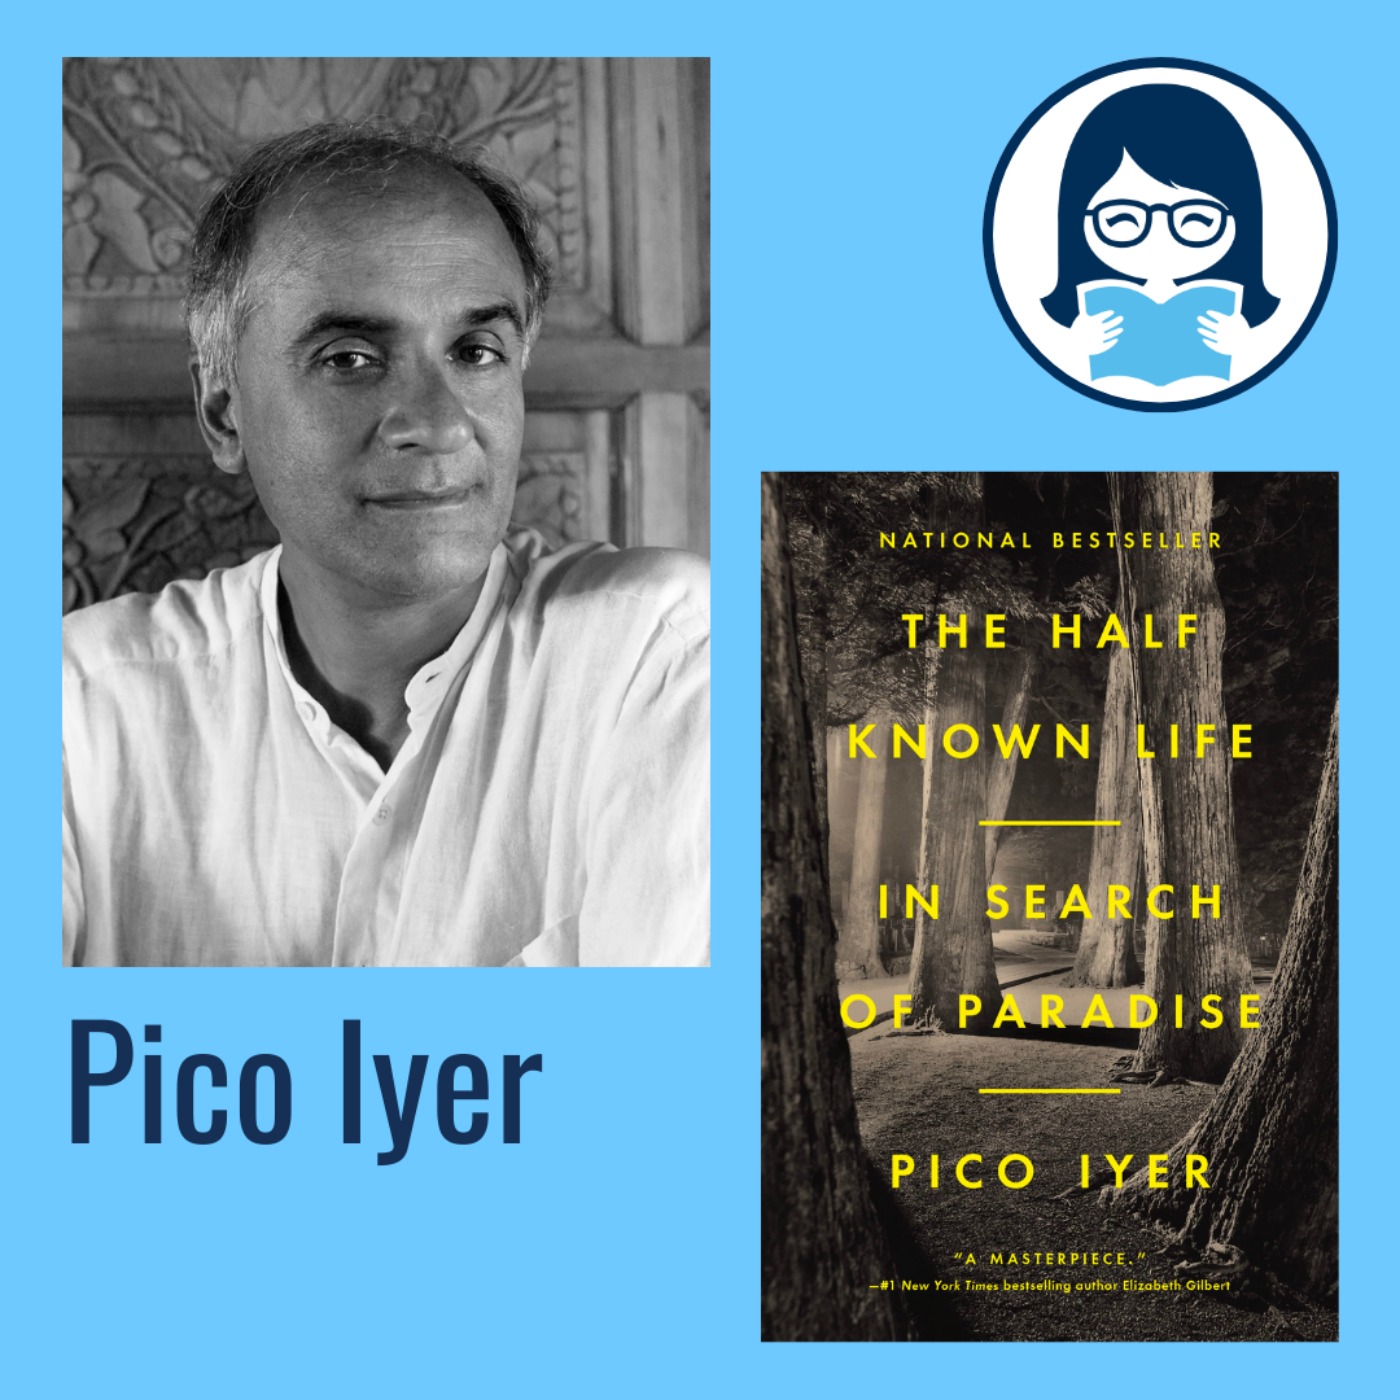 Pico Iyer, THE HALF KNOWN LIFE: In Search of Paradise